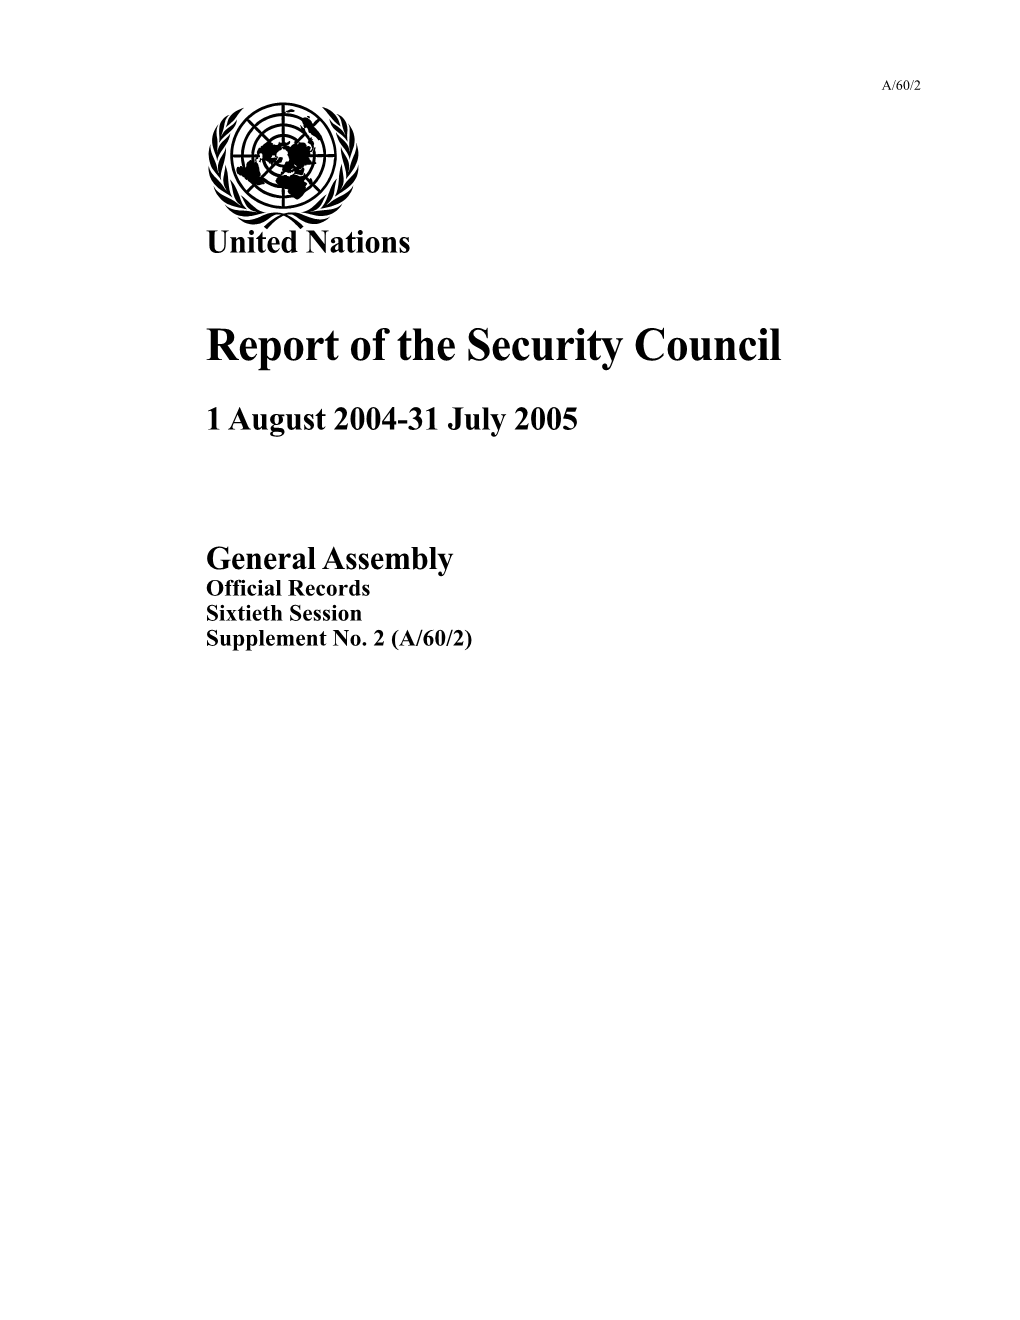 Report of the Security Council 1 August 2004-31 July 2005